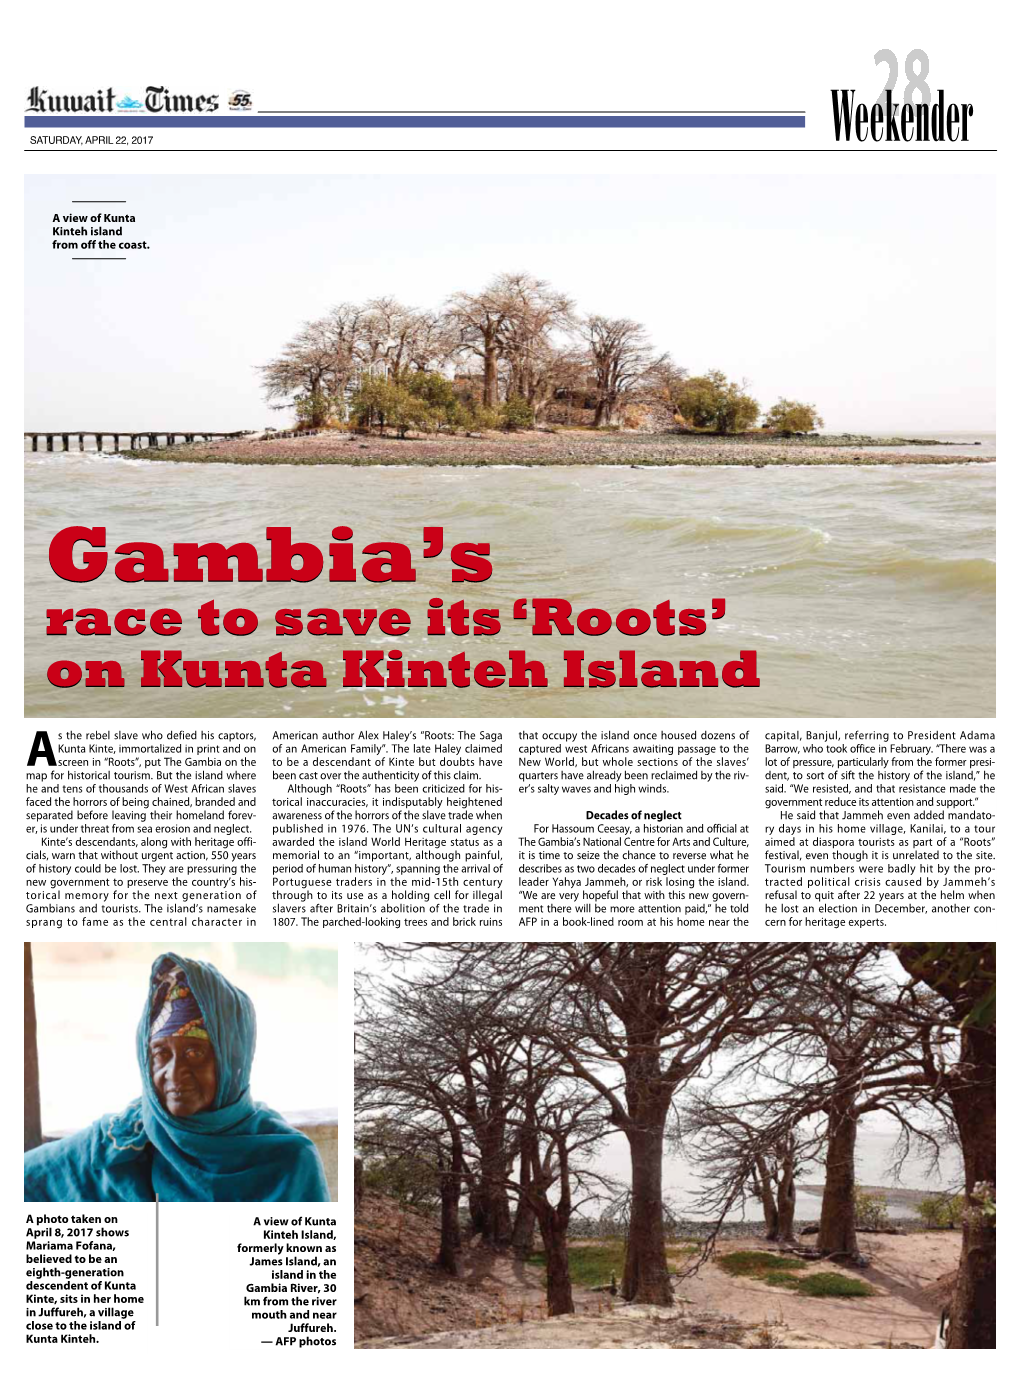 Gambia's Gambia's